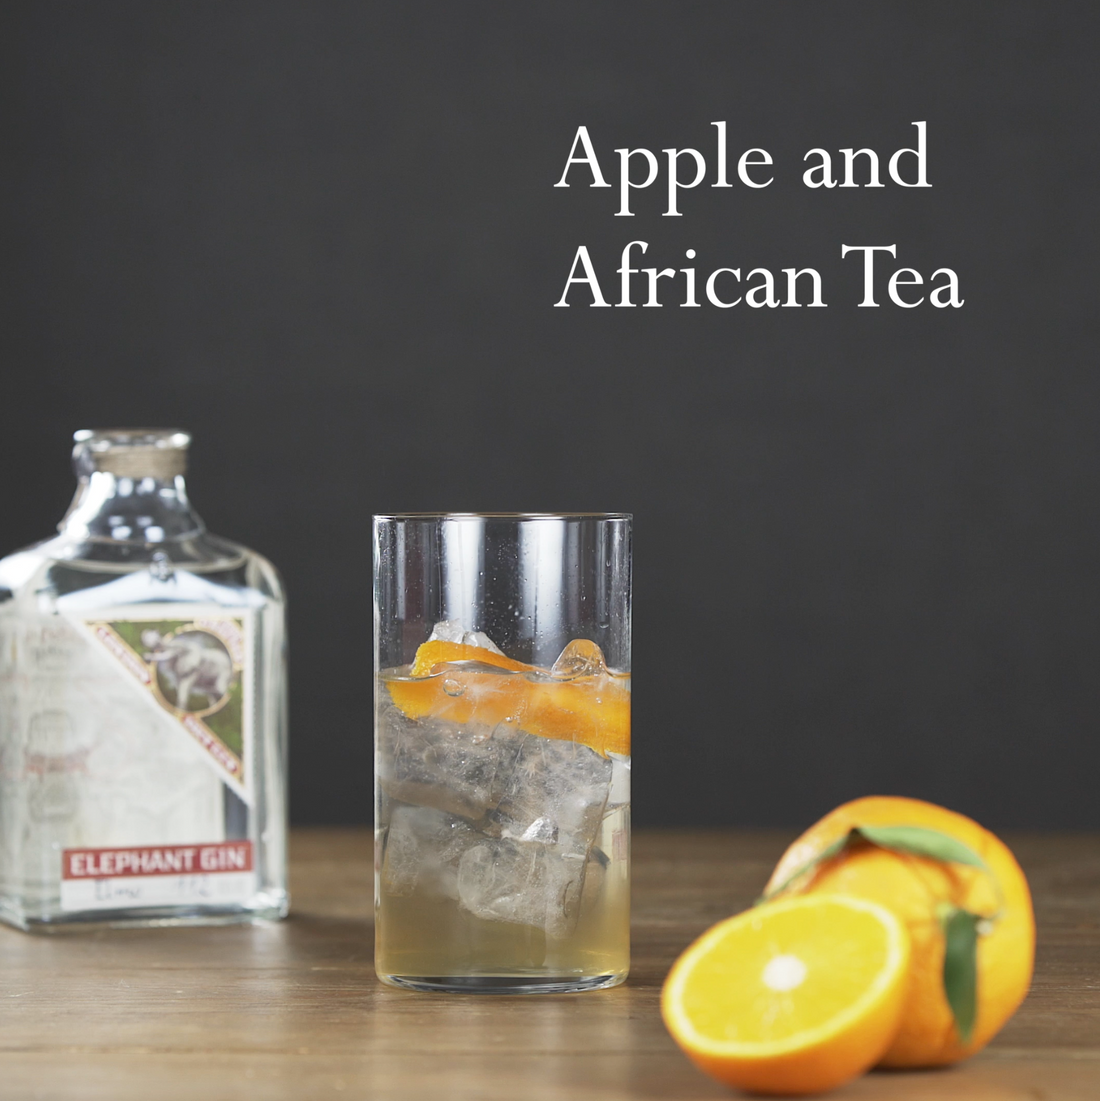 Apple and African Tea